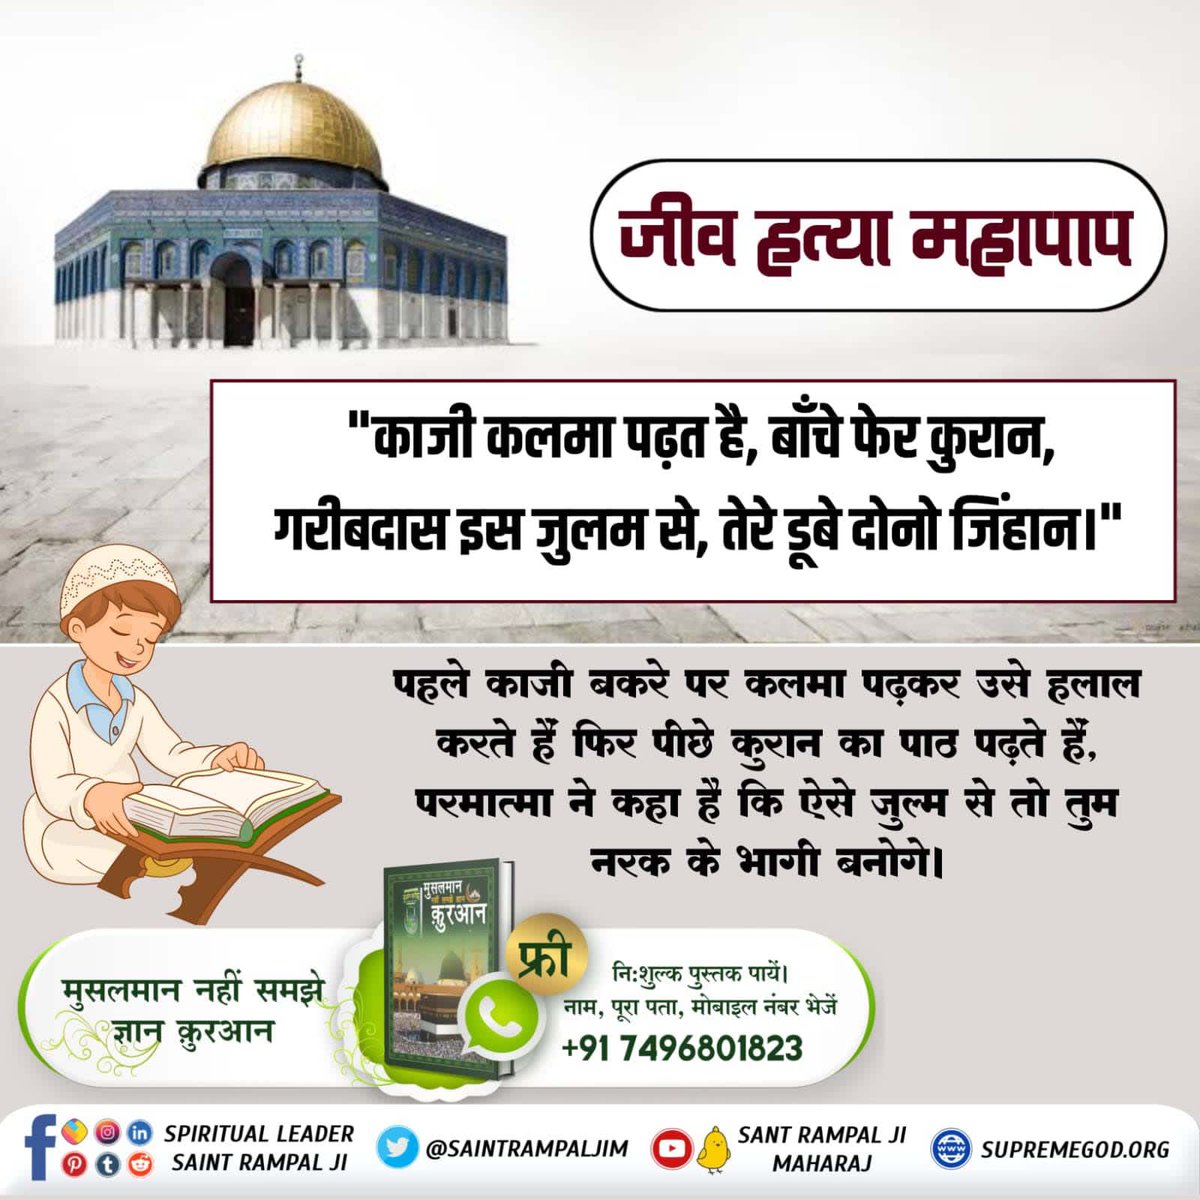 #रहम_करो_मूक_जीवों_पर

ALLAH KABIR
met Hazrat Muhammad and explained him about the worship of one God and the same was preached by him to his followers. Nabi Muhammad was against killing of animals. That's why Hazrat Muhammad never ate meat nor asked anyone to eat meat.